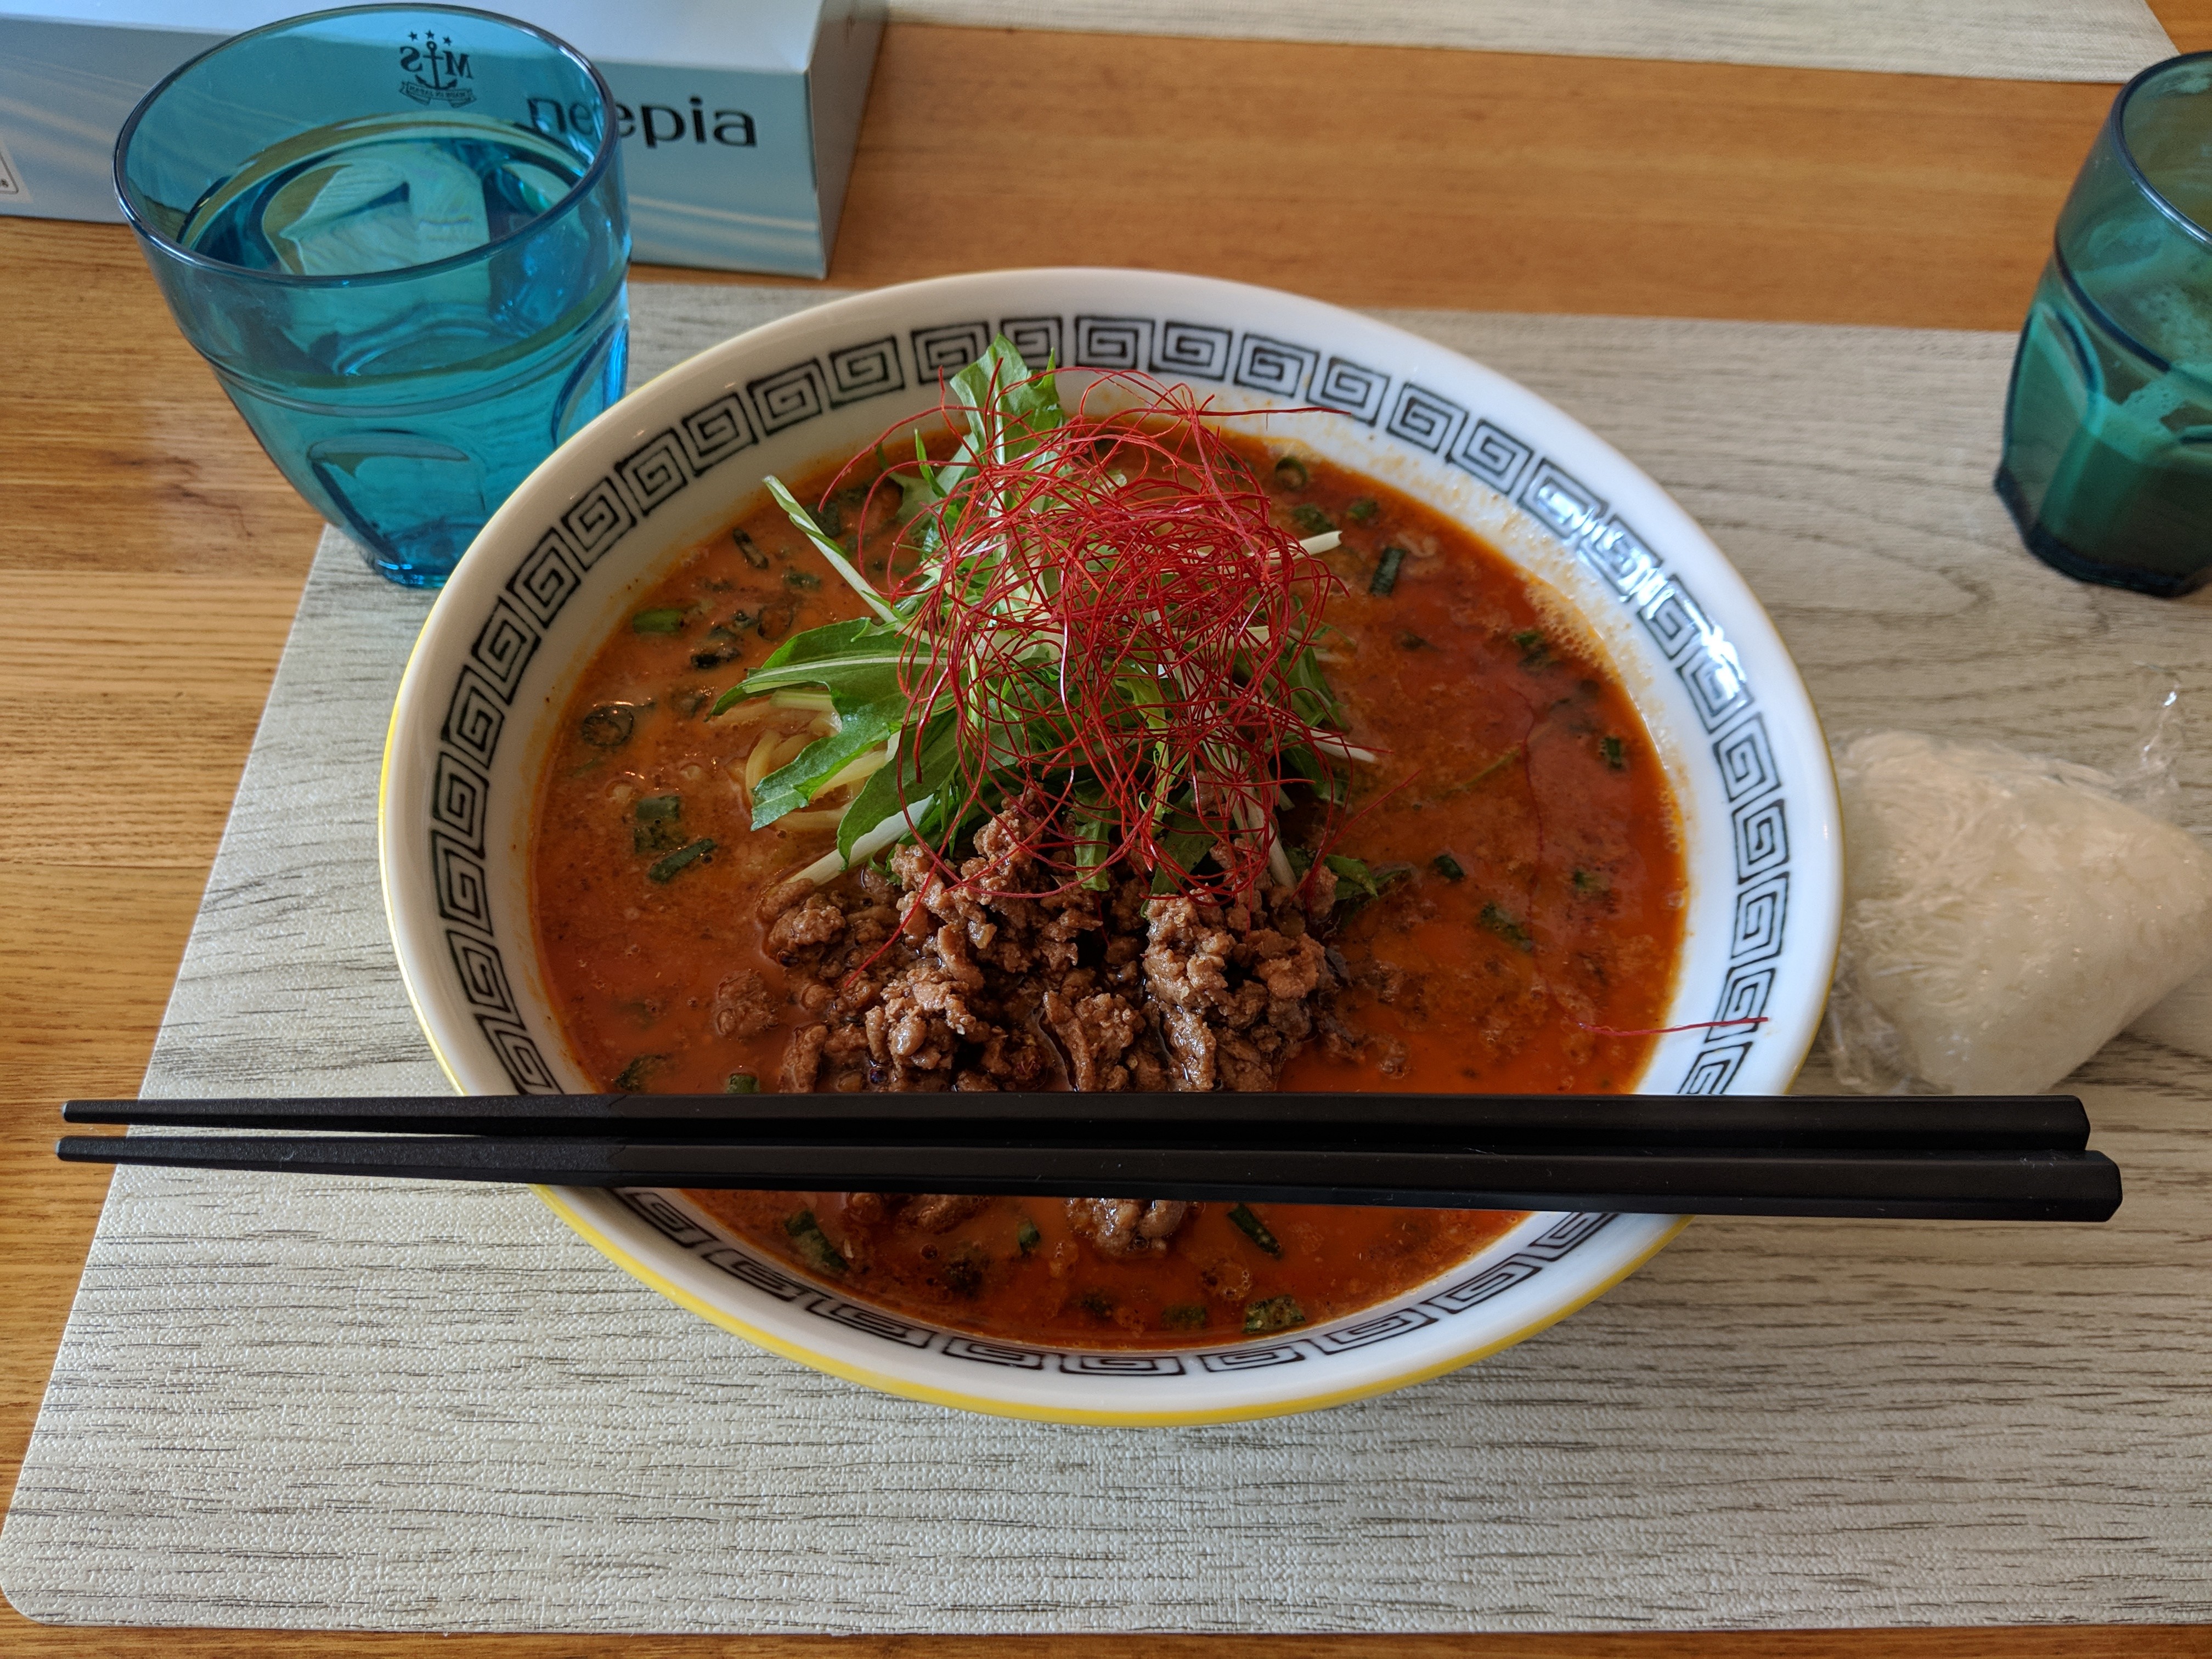 Our spicy tantanmen lunch